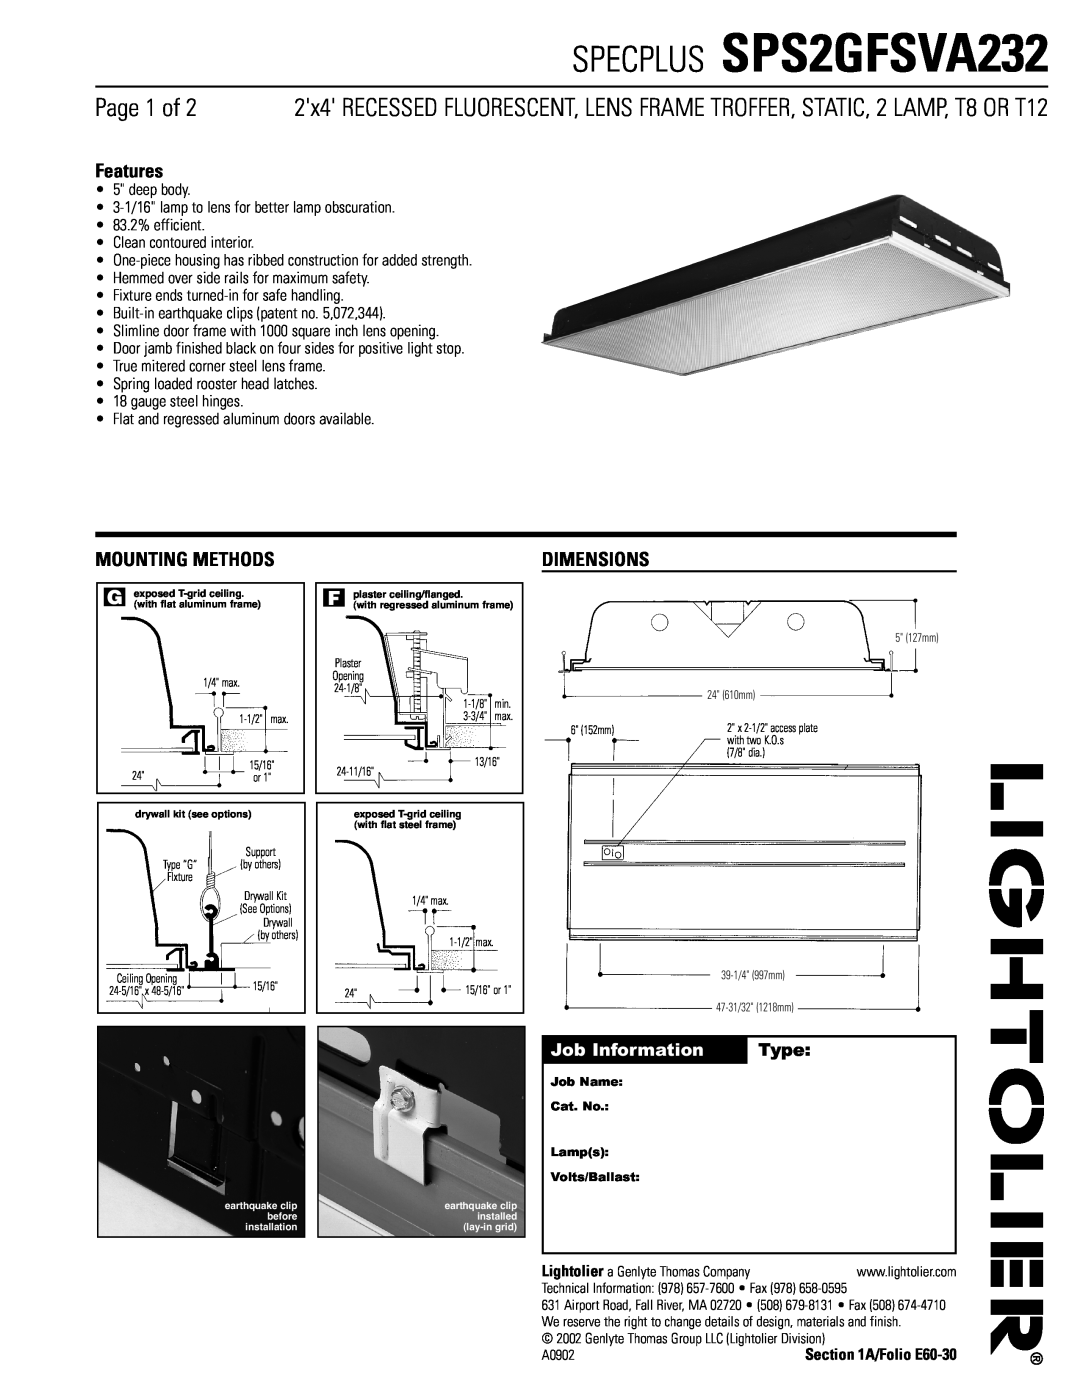 Lightolier dimensions SPECPLUS SPS2GFSVA232, Page 1 of, Features, Mounting Methods, Dimensions, Job Information, Type 